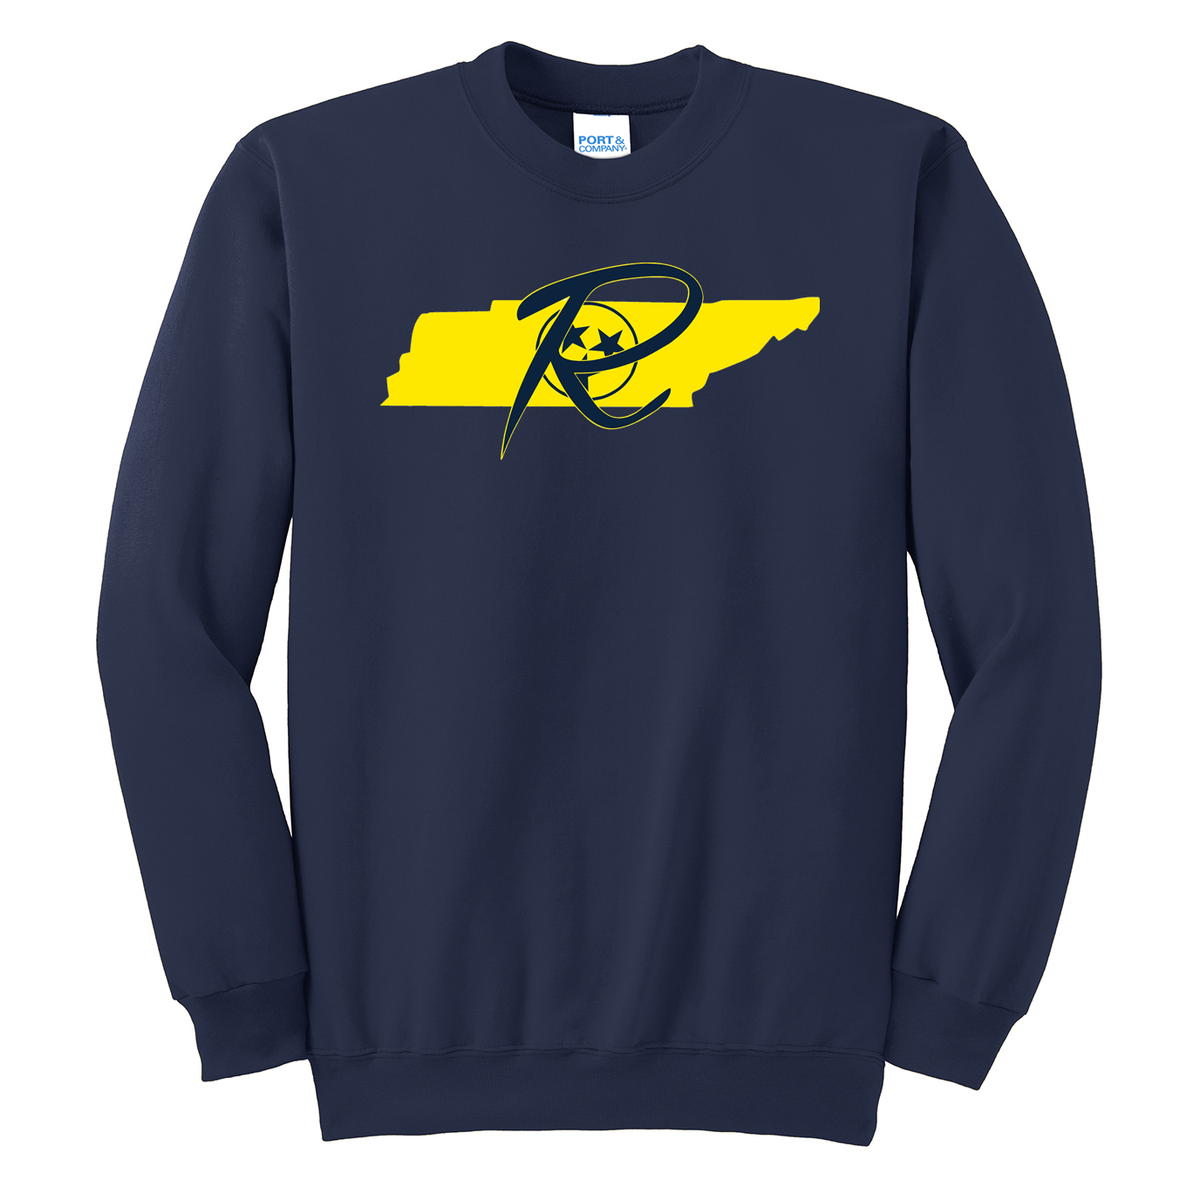 Tennessee Rumble Baseball Crew Neck Sweater